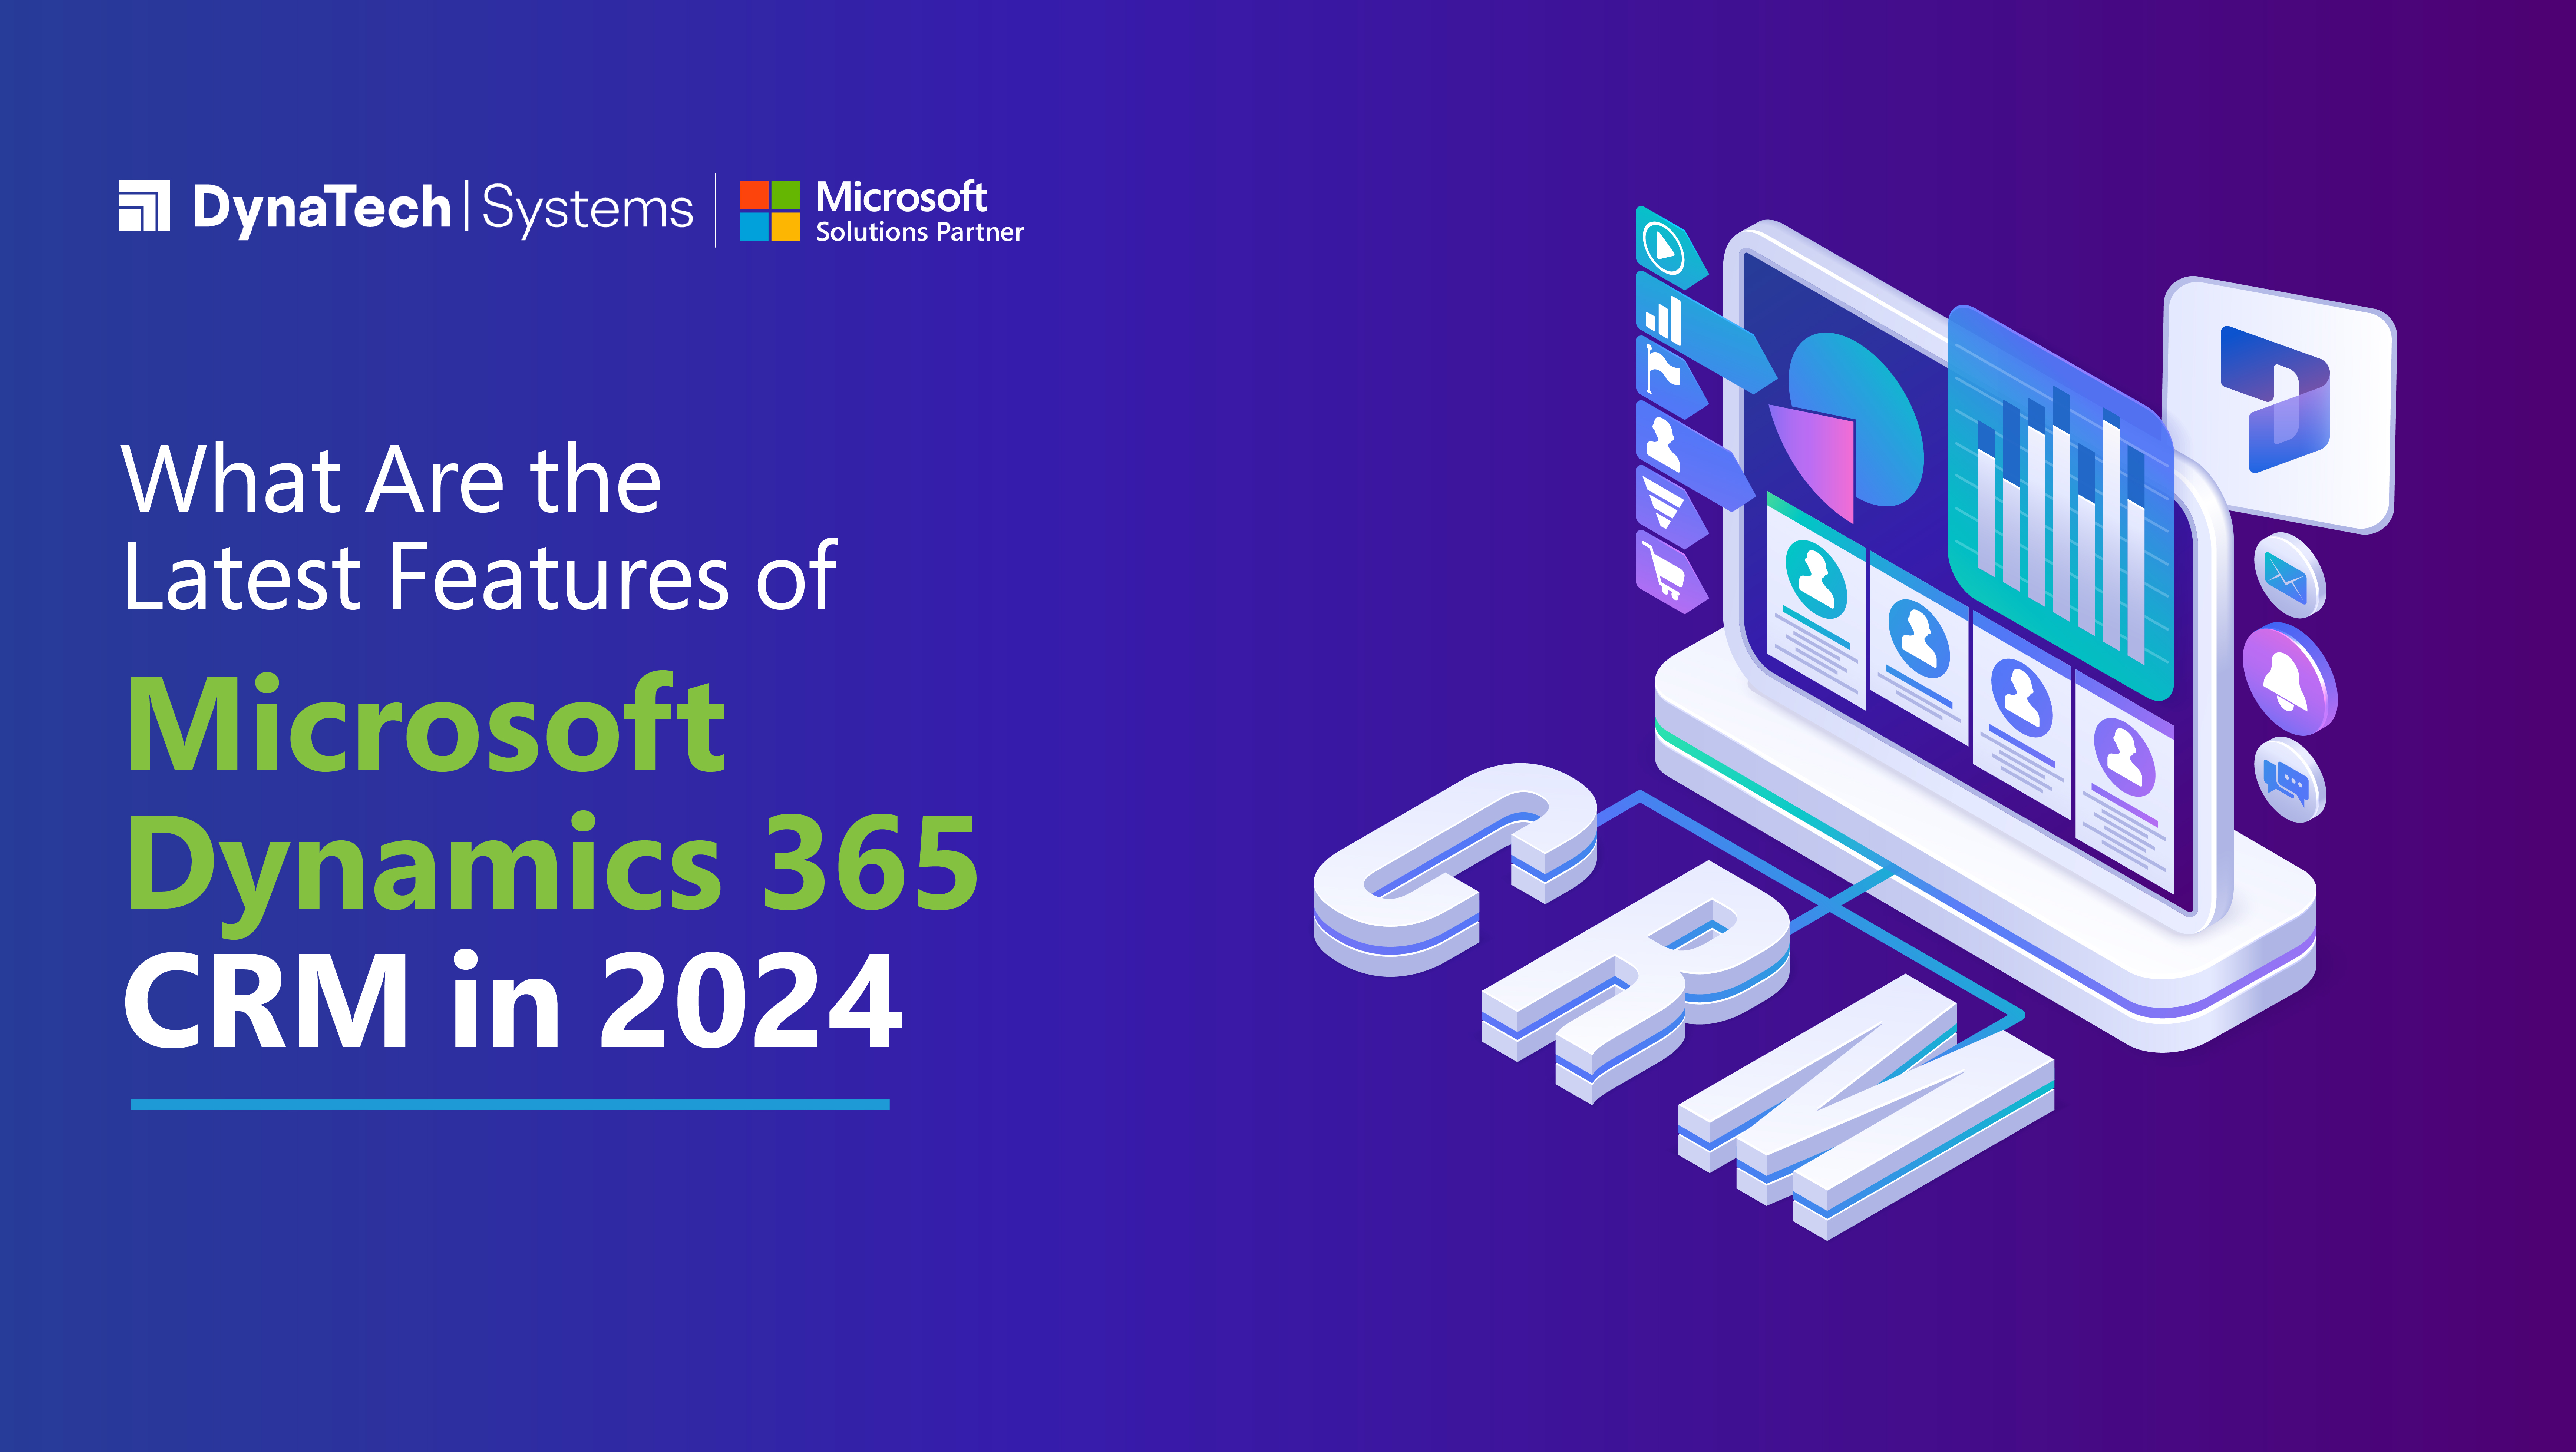 What are the Latest Features of Microsoft Dynamics 365 CRM in 2024